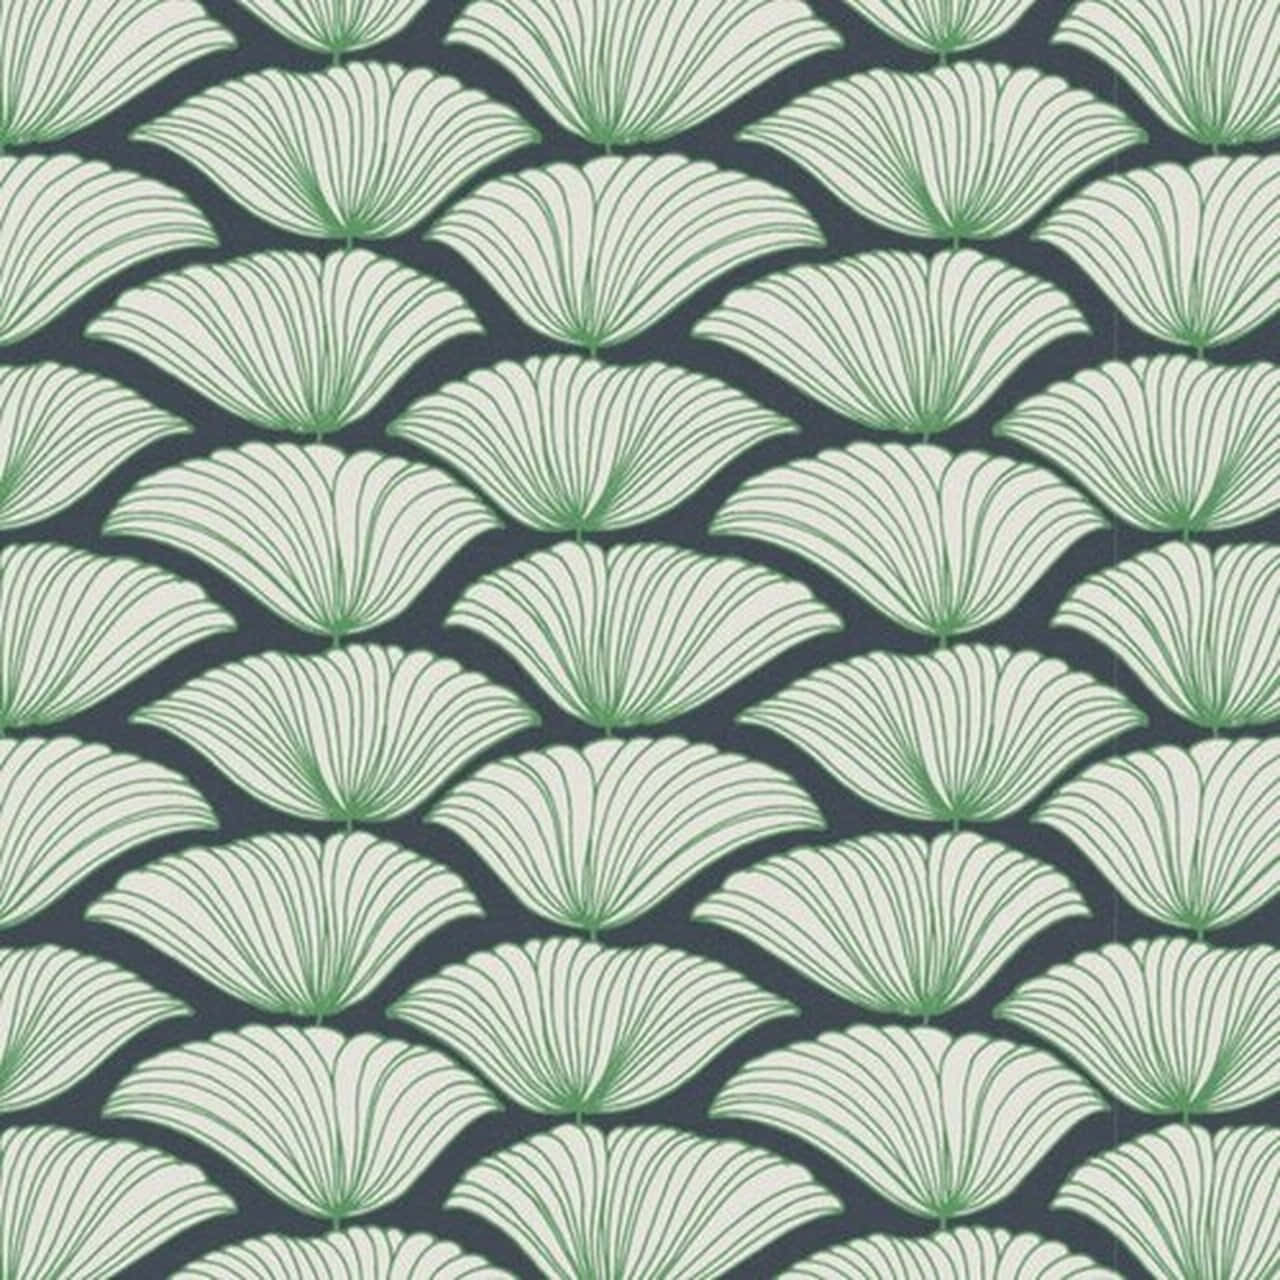 A Green And White Wallpaper With Leaves